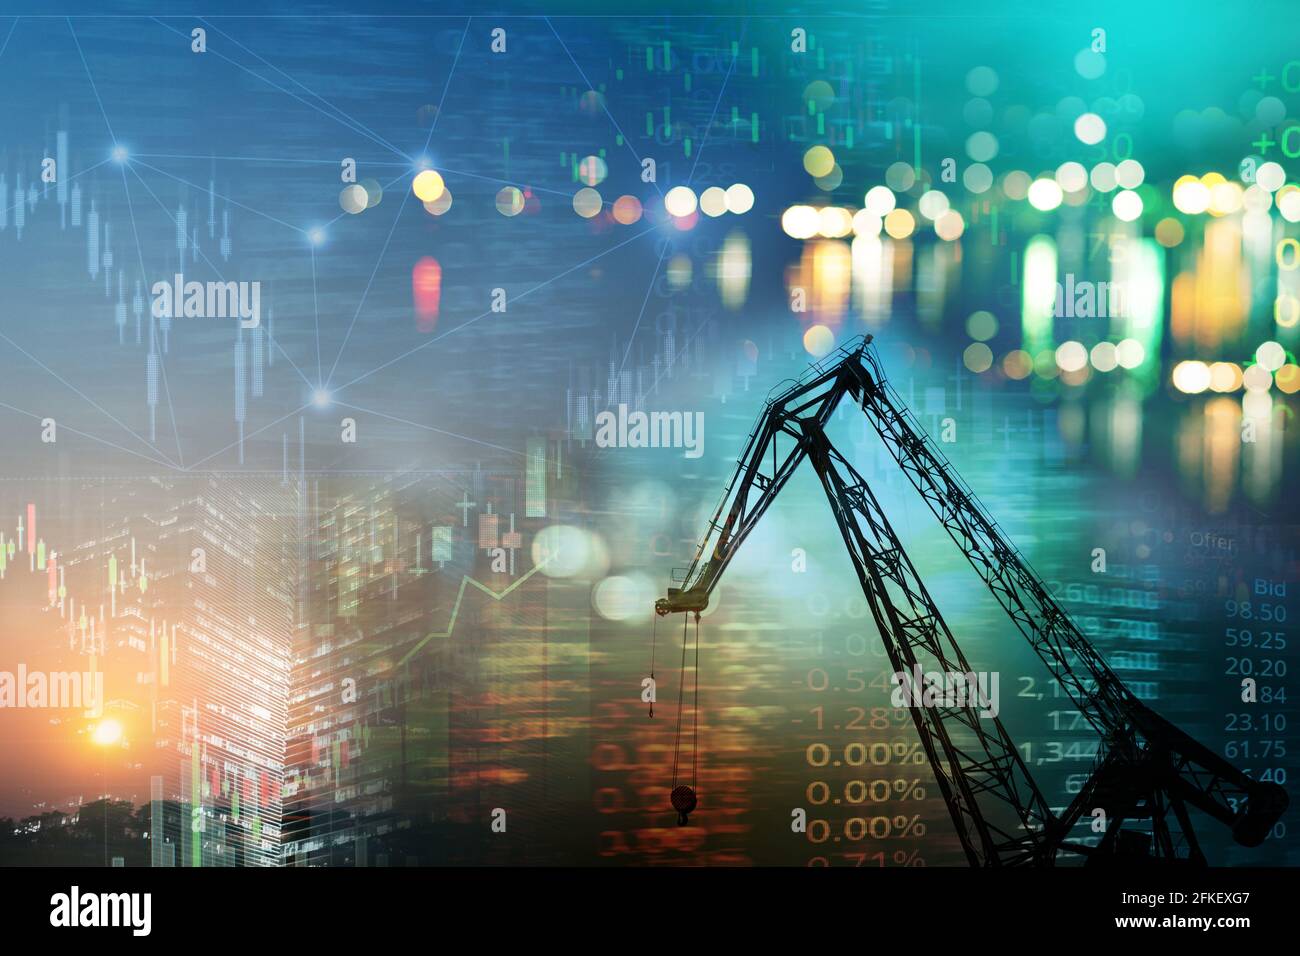 metal construction crane and market stock graph with index information industry and business background Stock Photo